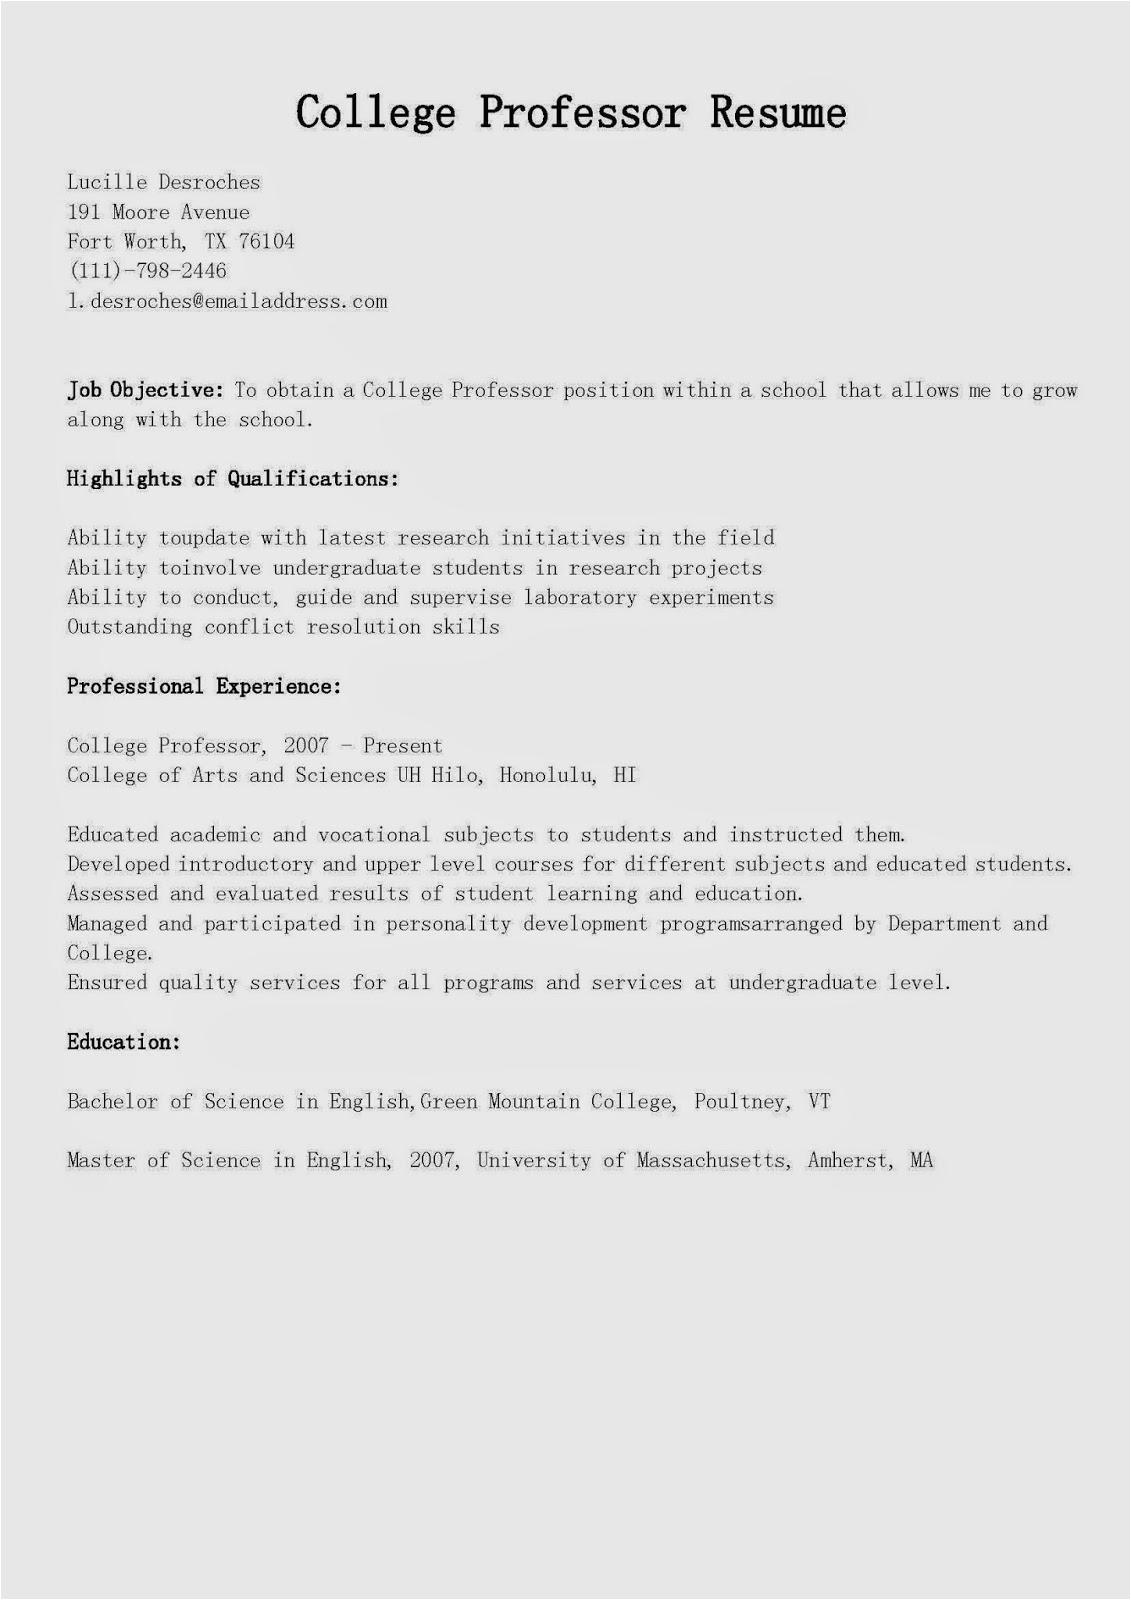 Sample Resume for College Faculty Position Resume Samples College Professor Resume Sample